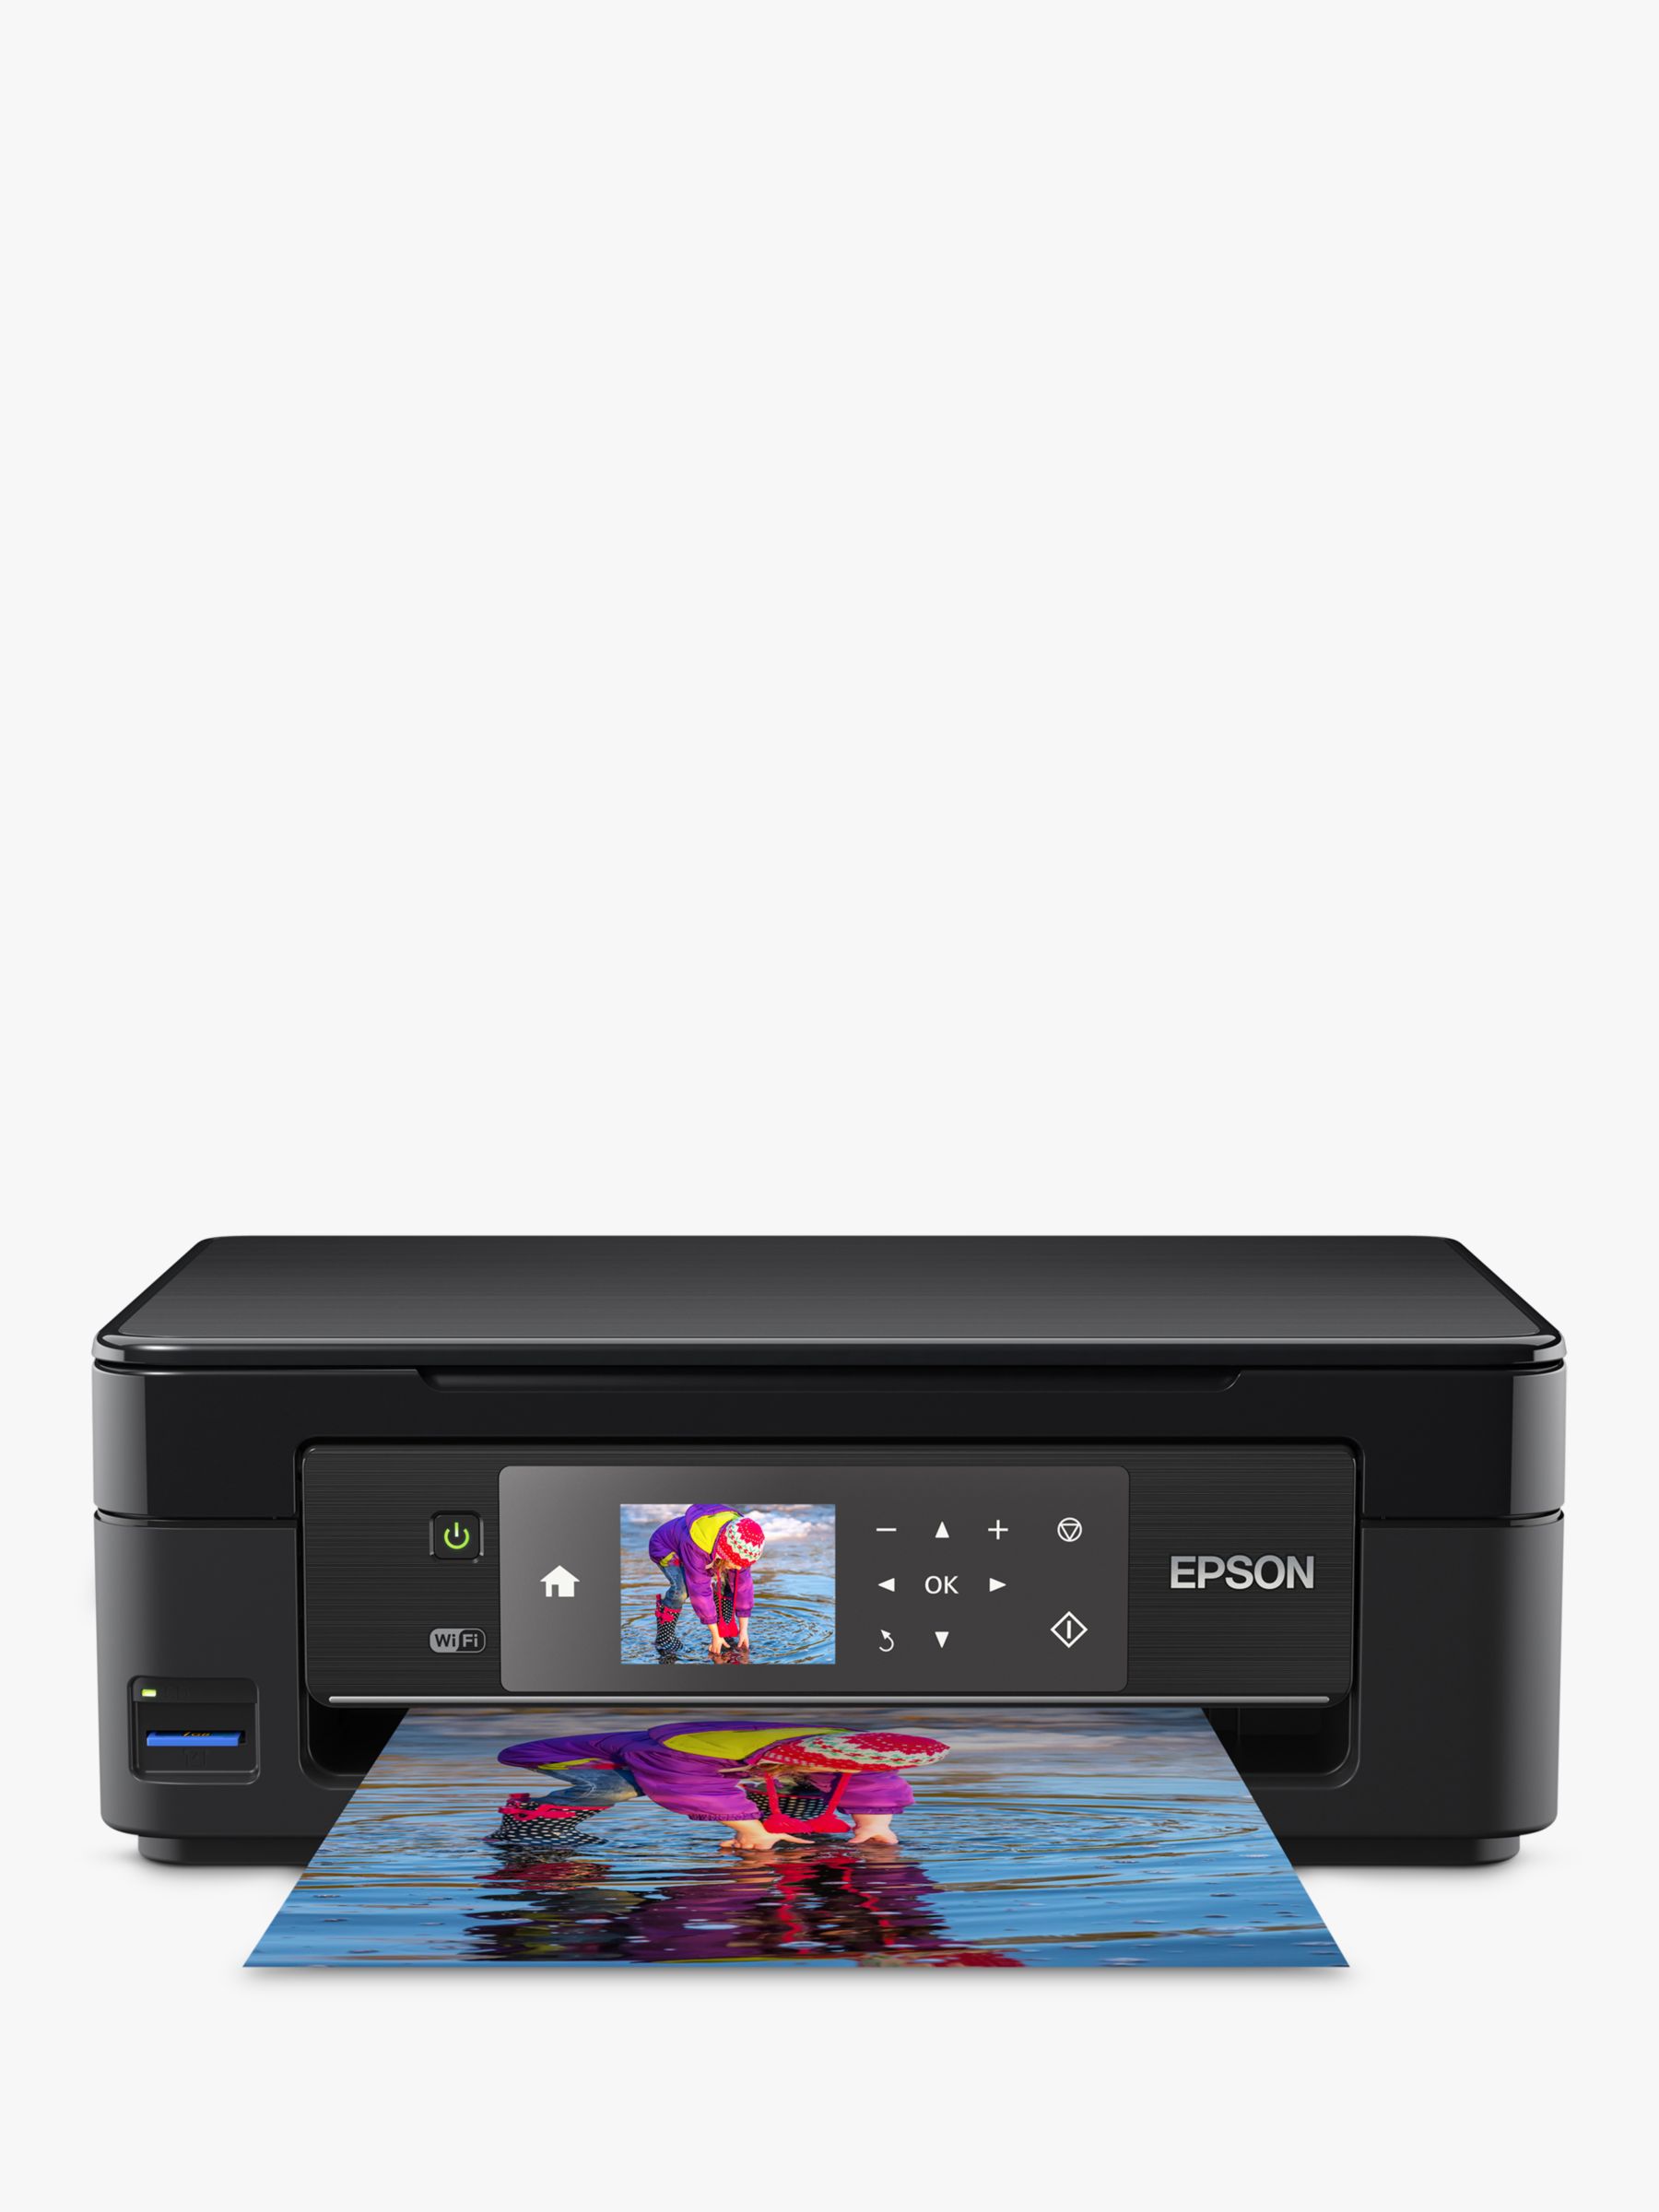 Epson expression Home XP-320 русификатор. Epson expression home xp